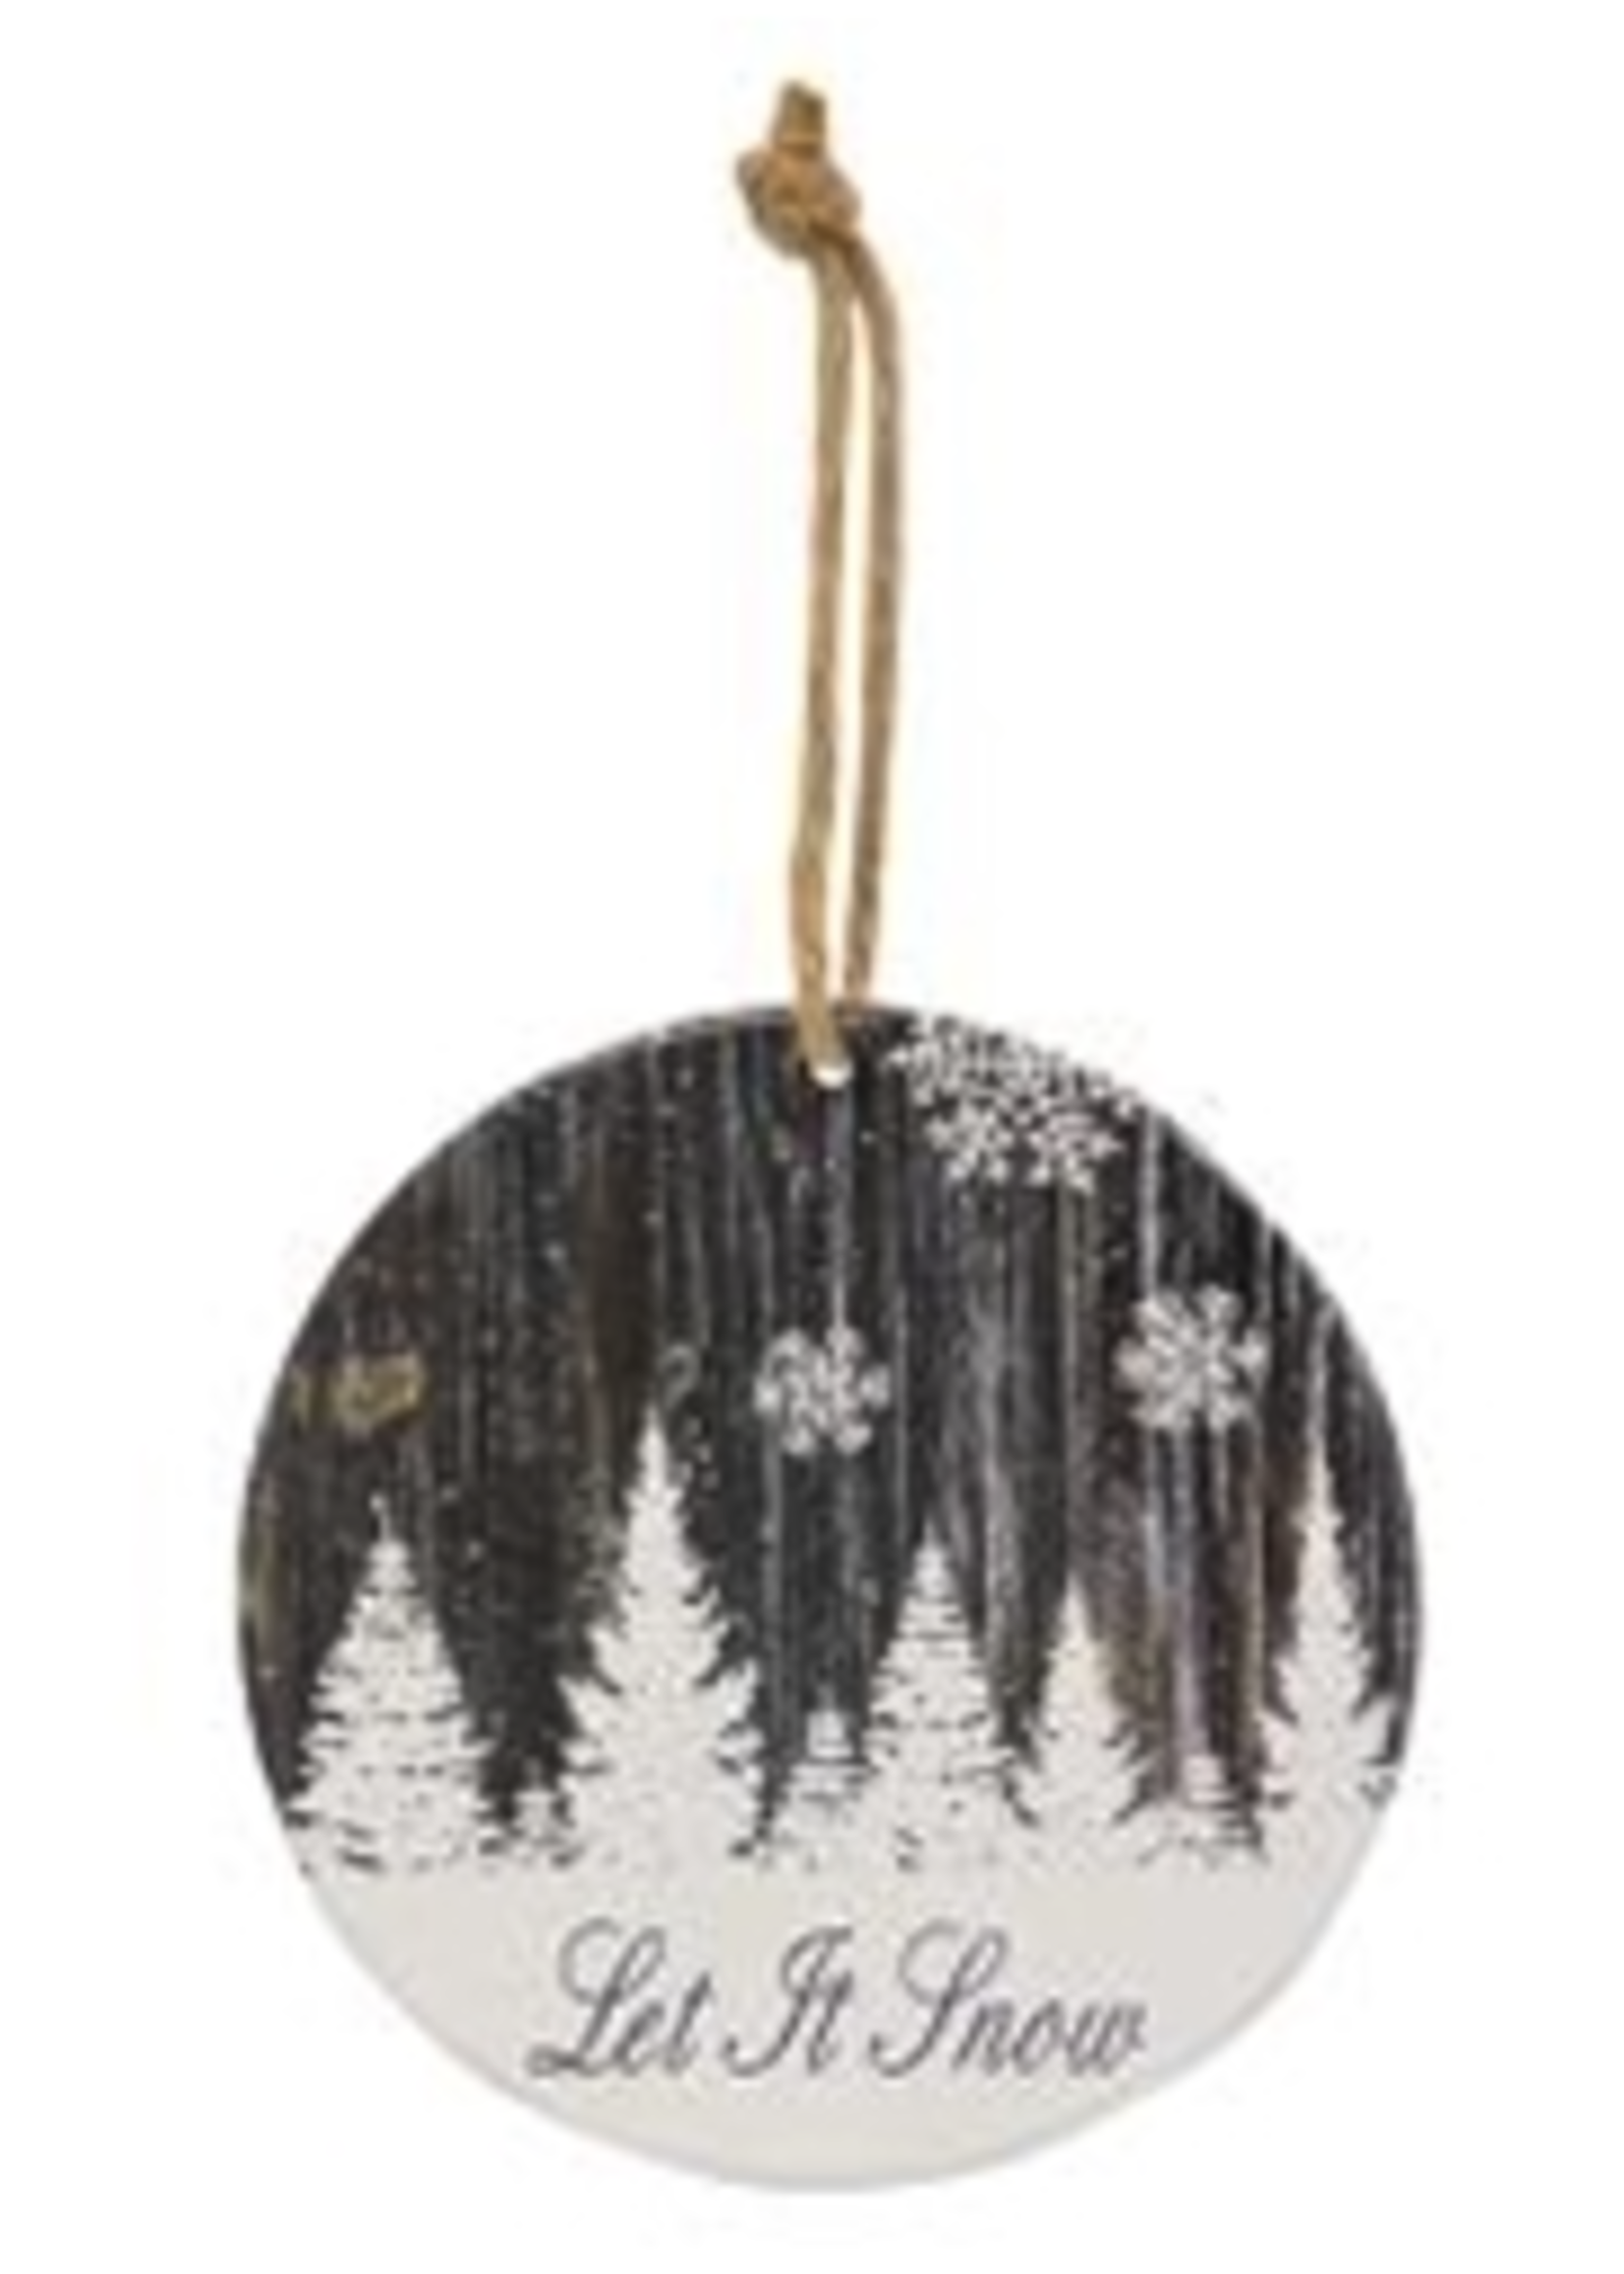 CWI Gifts Let It Snow Snowy Woodgrain 5"